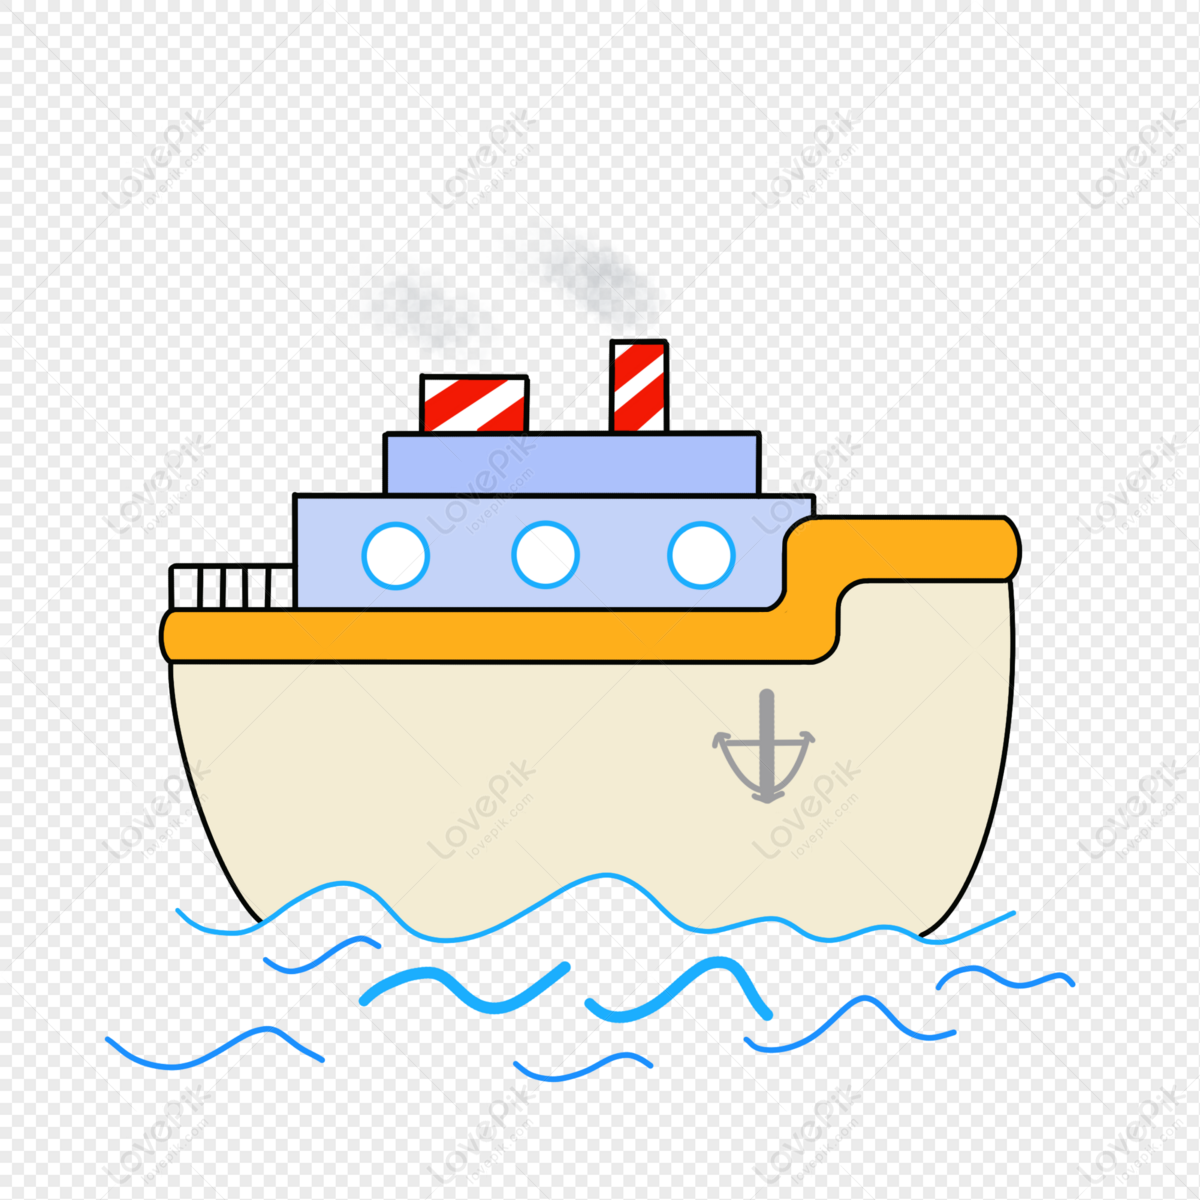 Hand Drawn Cartoon Ship PNG Transparent Image And Clipart Image For Free  Download - Lovepik | 401440847